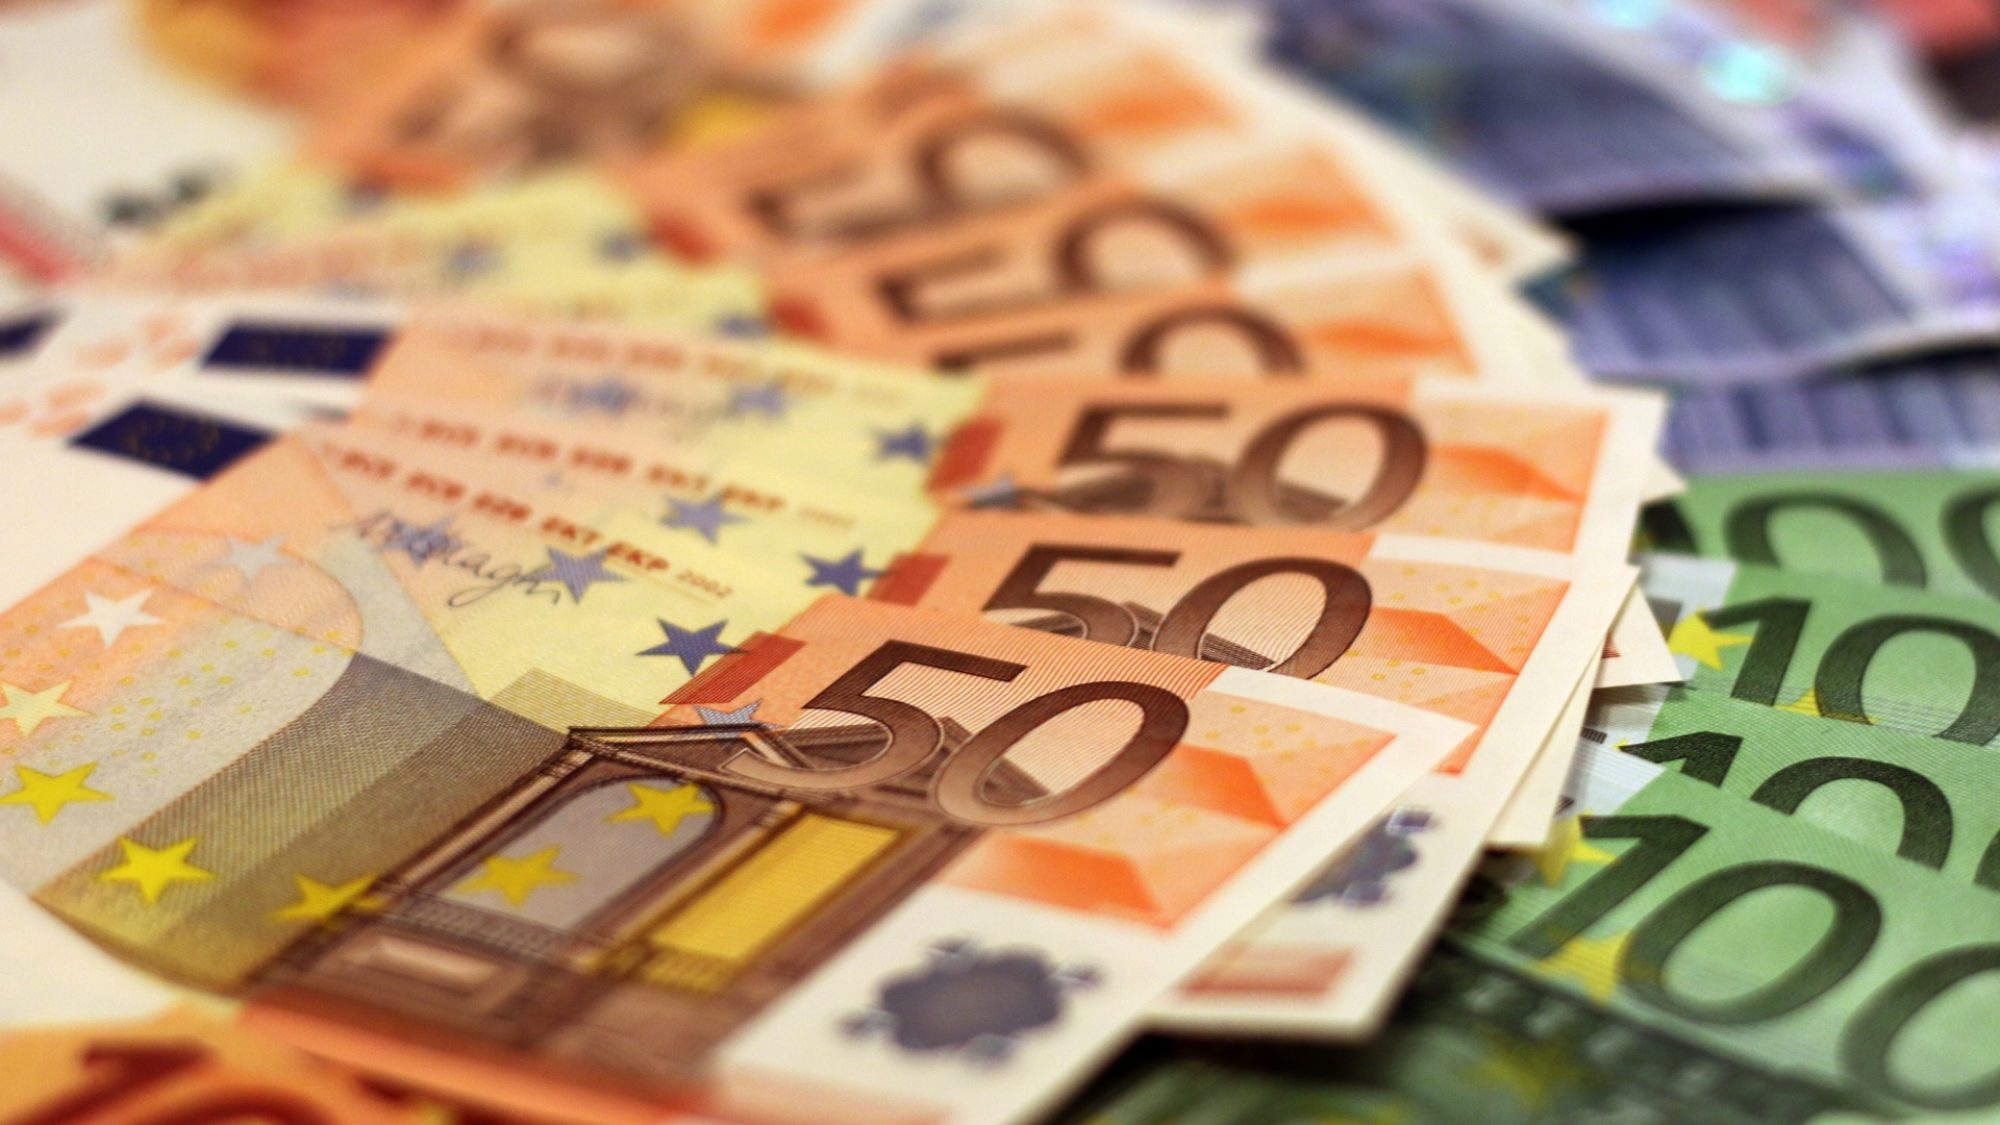 A stack of euros.